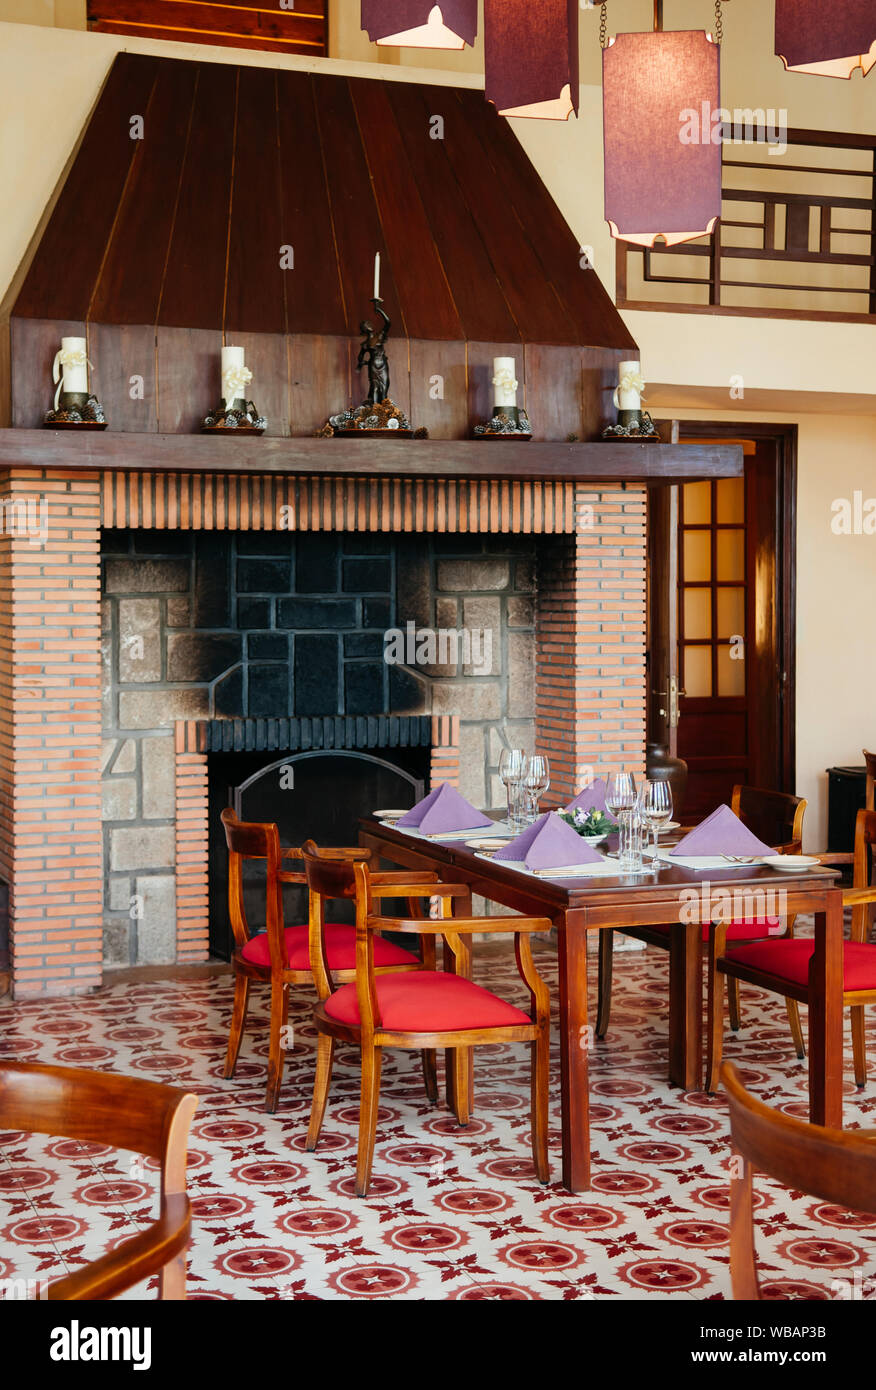 Feb 25 2014 Dalat Vietnam Dining Room With Retro Tile Floor Old Brick Fireplace Wooden Chairs Dinner Table Pedant Lamps In French Colonial House Stock Photo Alamy